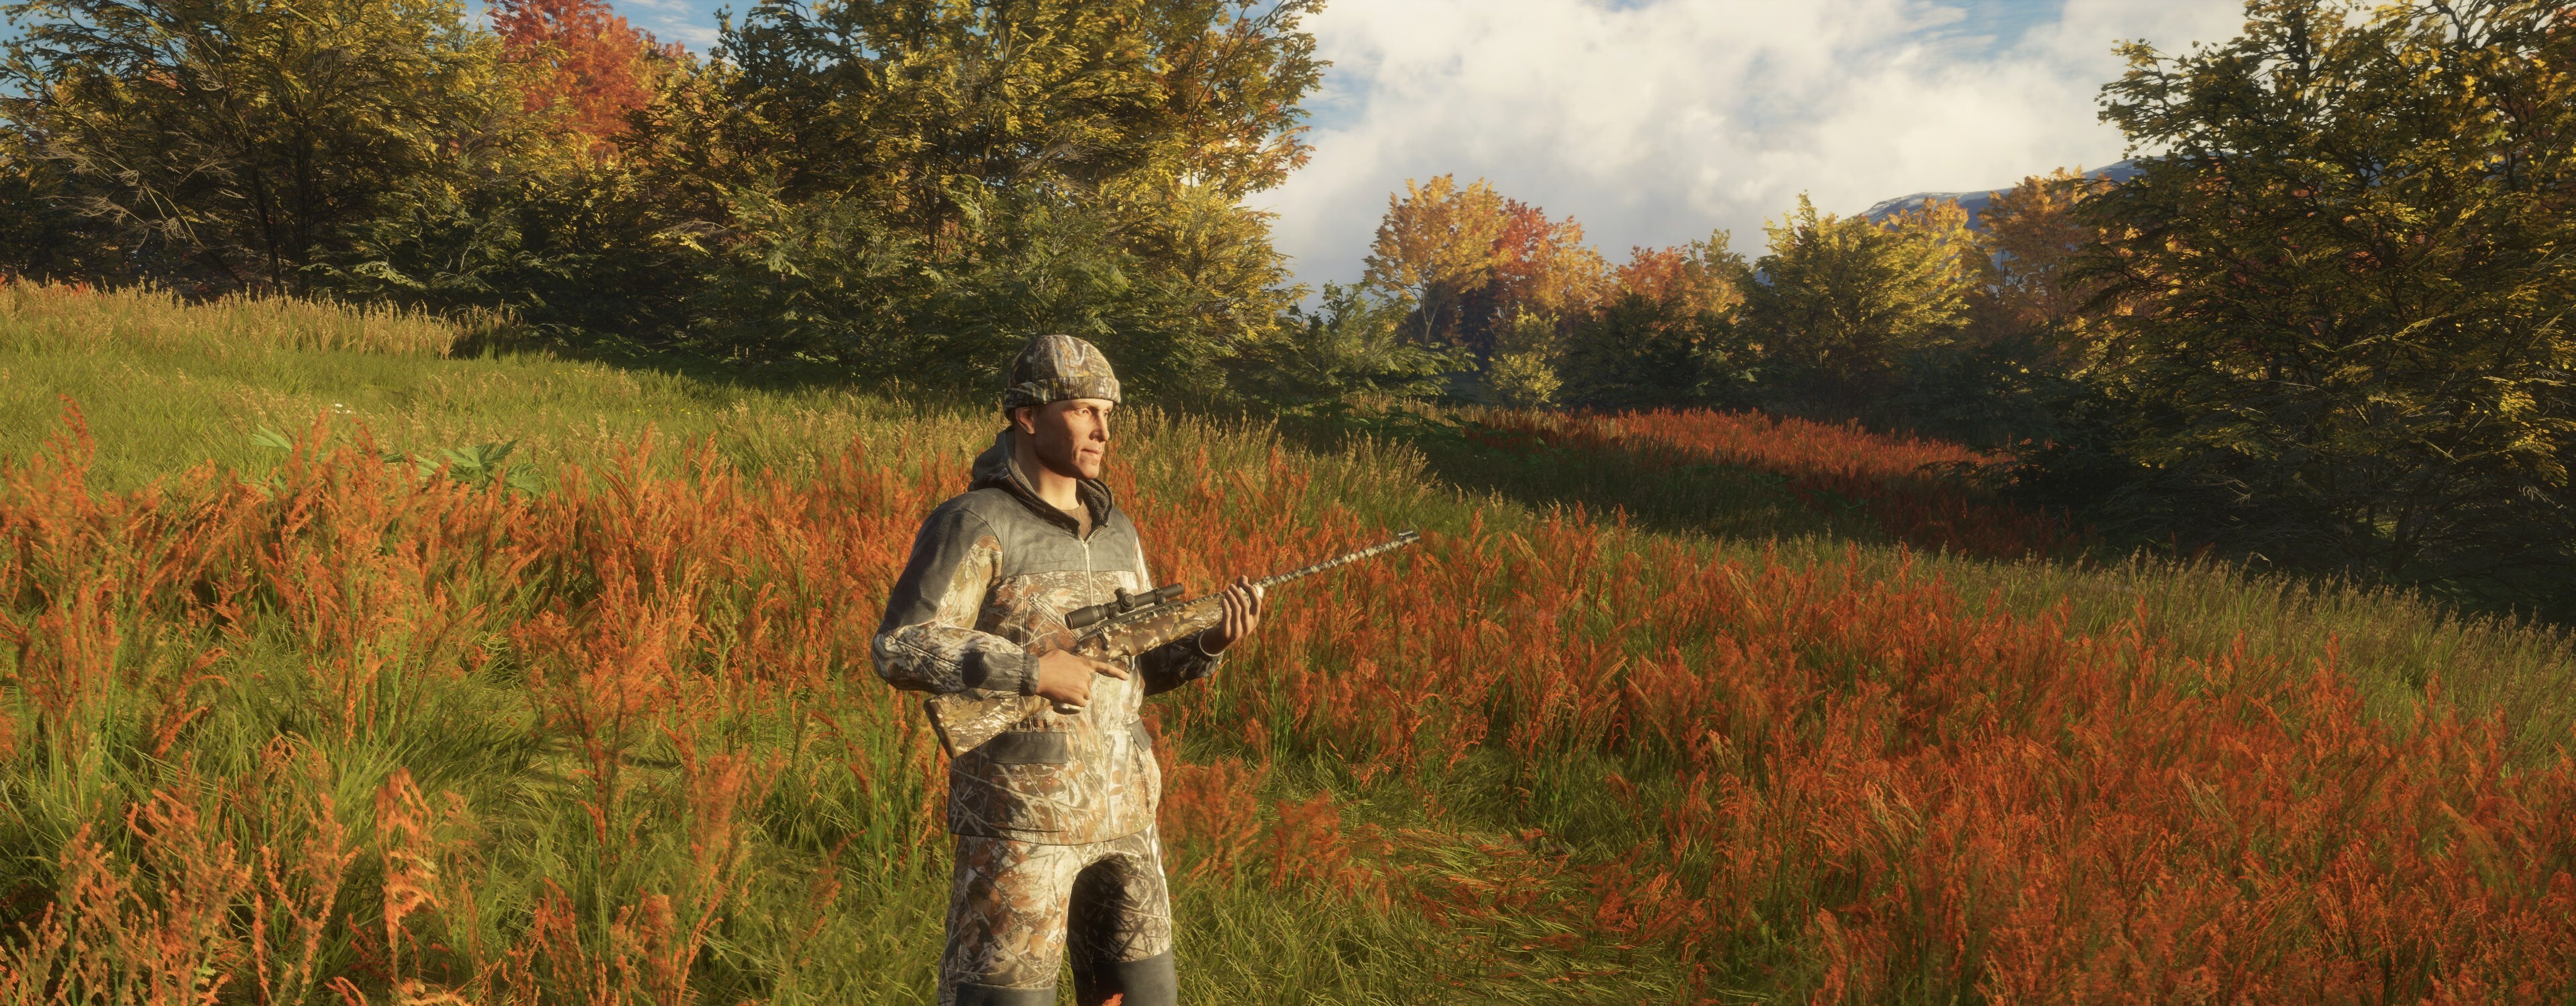 Third-person screenshot of a player character using a selection of Cosmetics from the Hirschfelden Cosmetic Pack, available on all platforms.